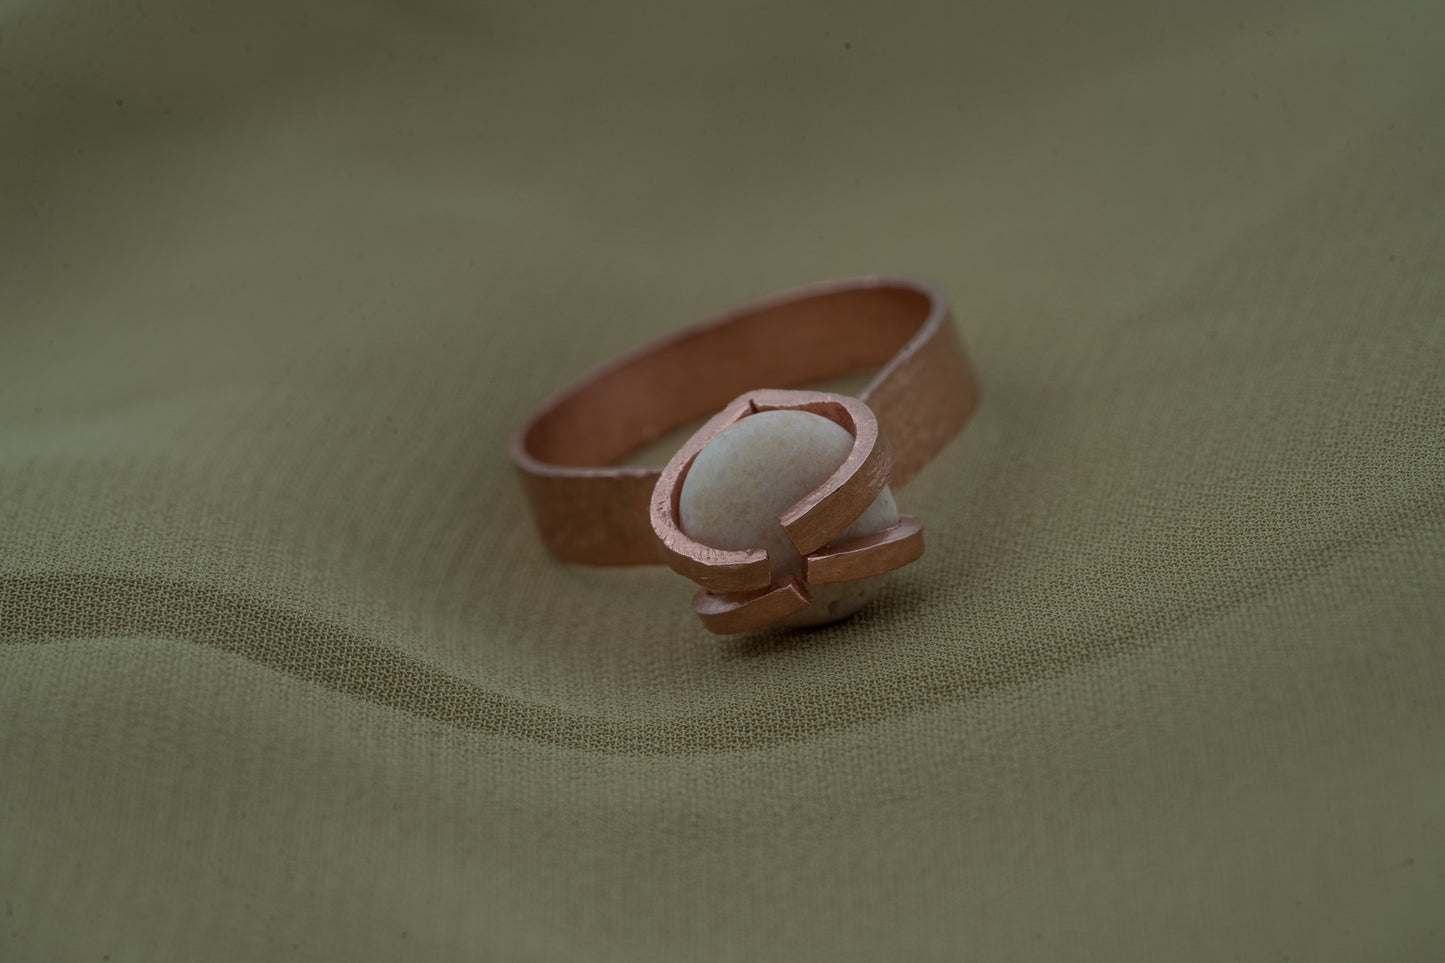 The Pebble ring